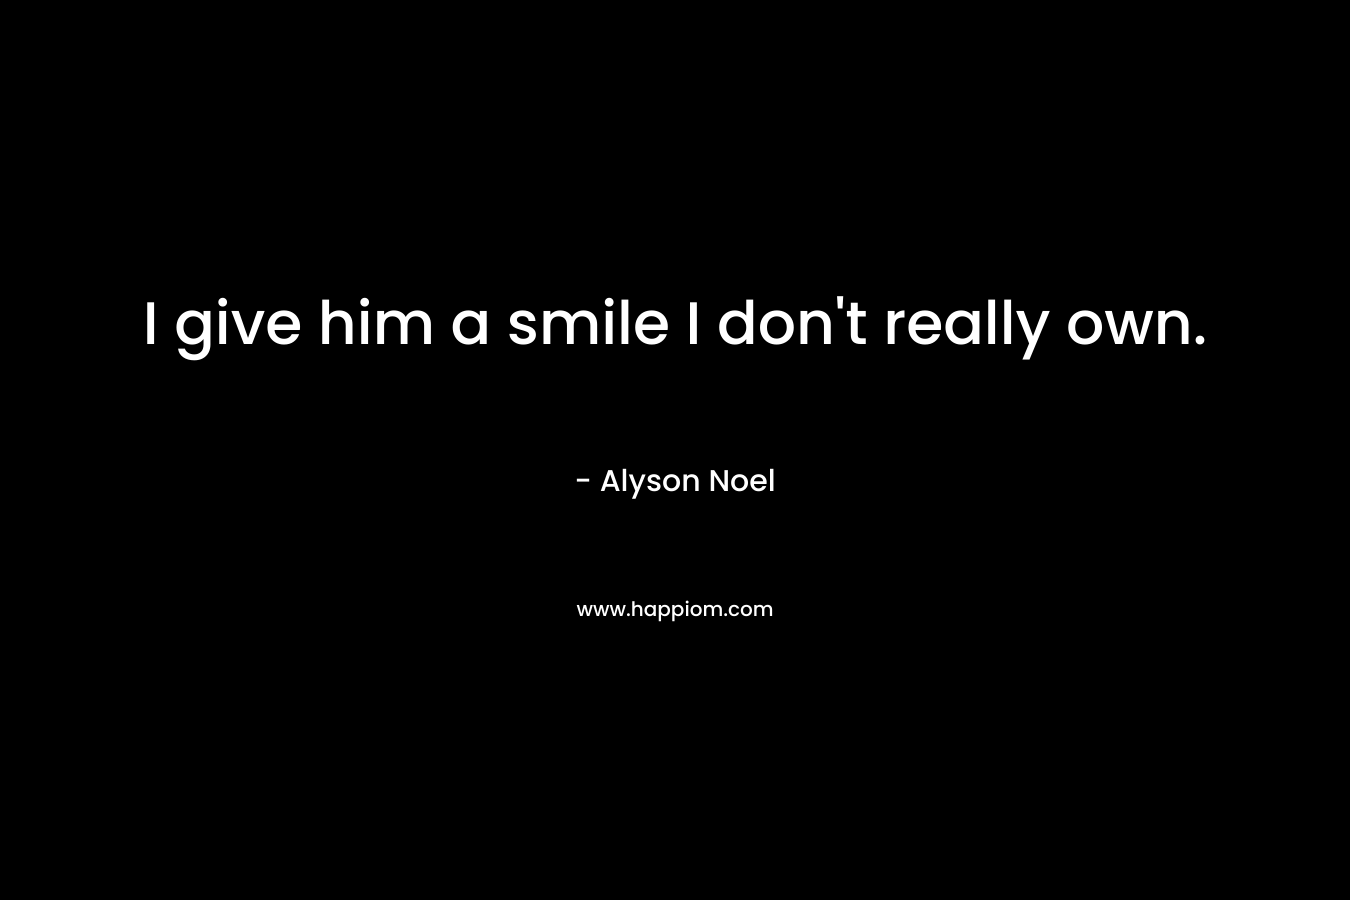 I give him a smile I don’t really own. – Alyson Noel